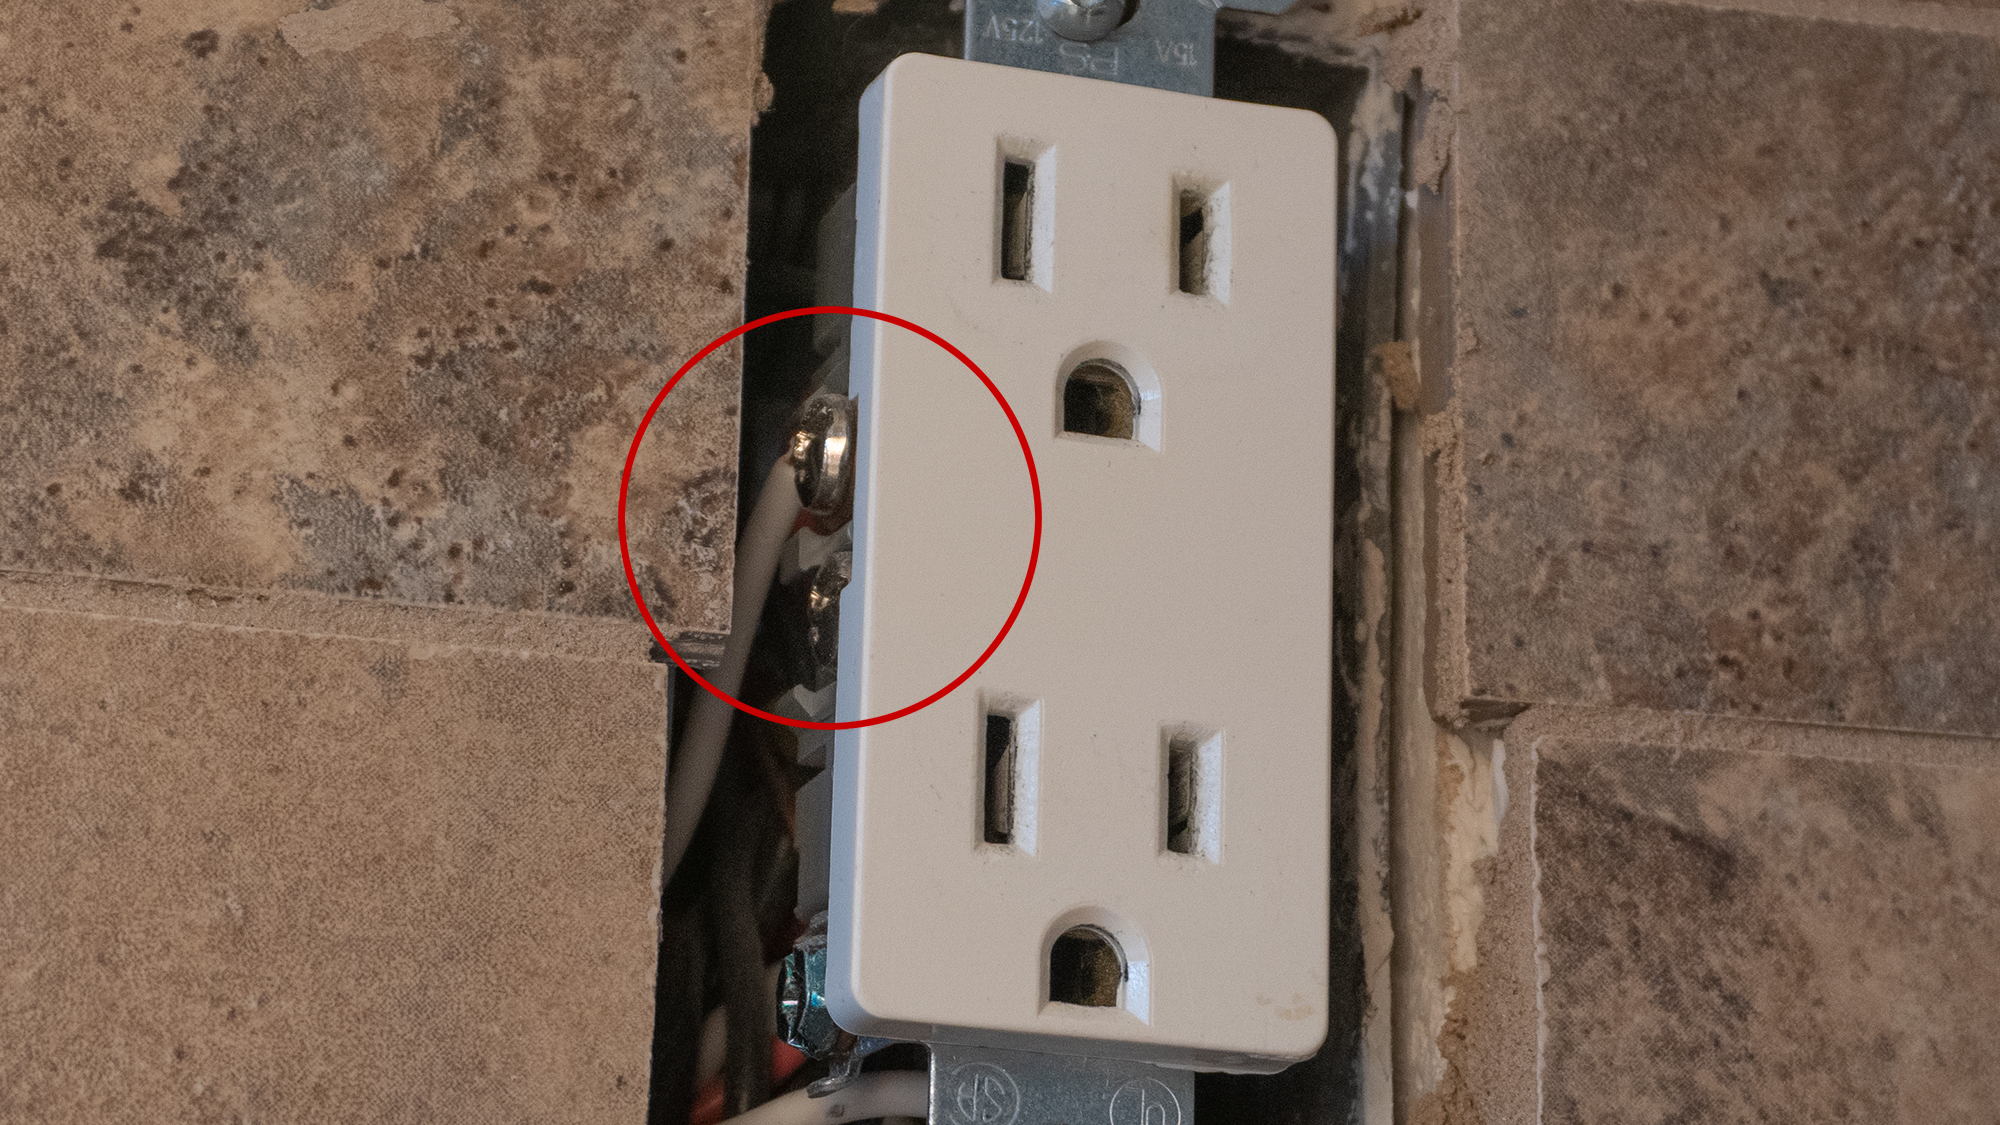 The prongs on the ConnectLight outlet cover make contact with these metal screws found on the sides of almost any outlet. (Photo: Andrew Liszewski/Gizmodo)